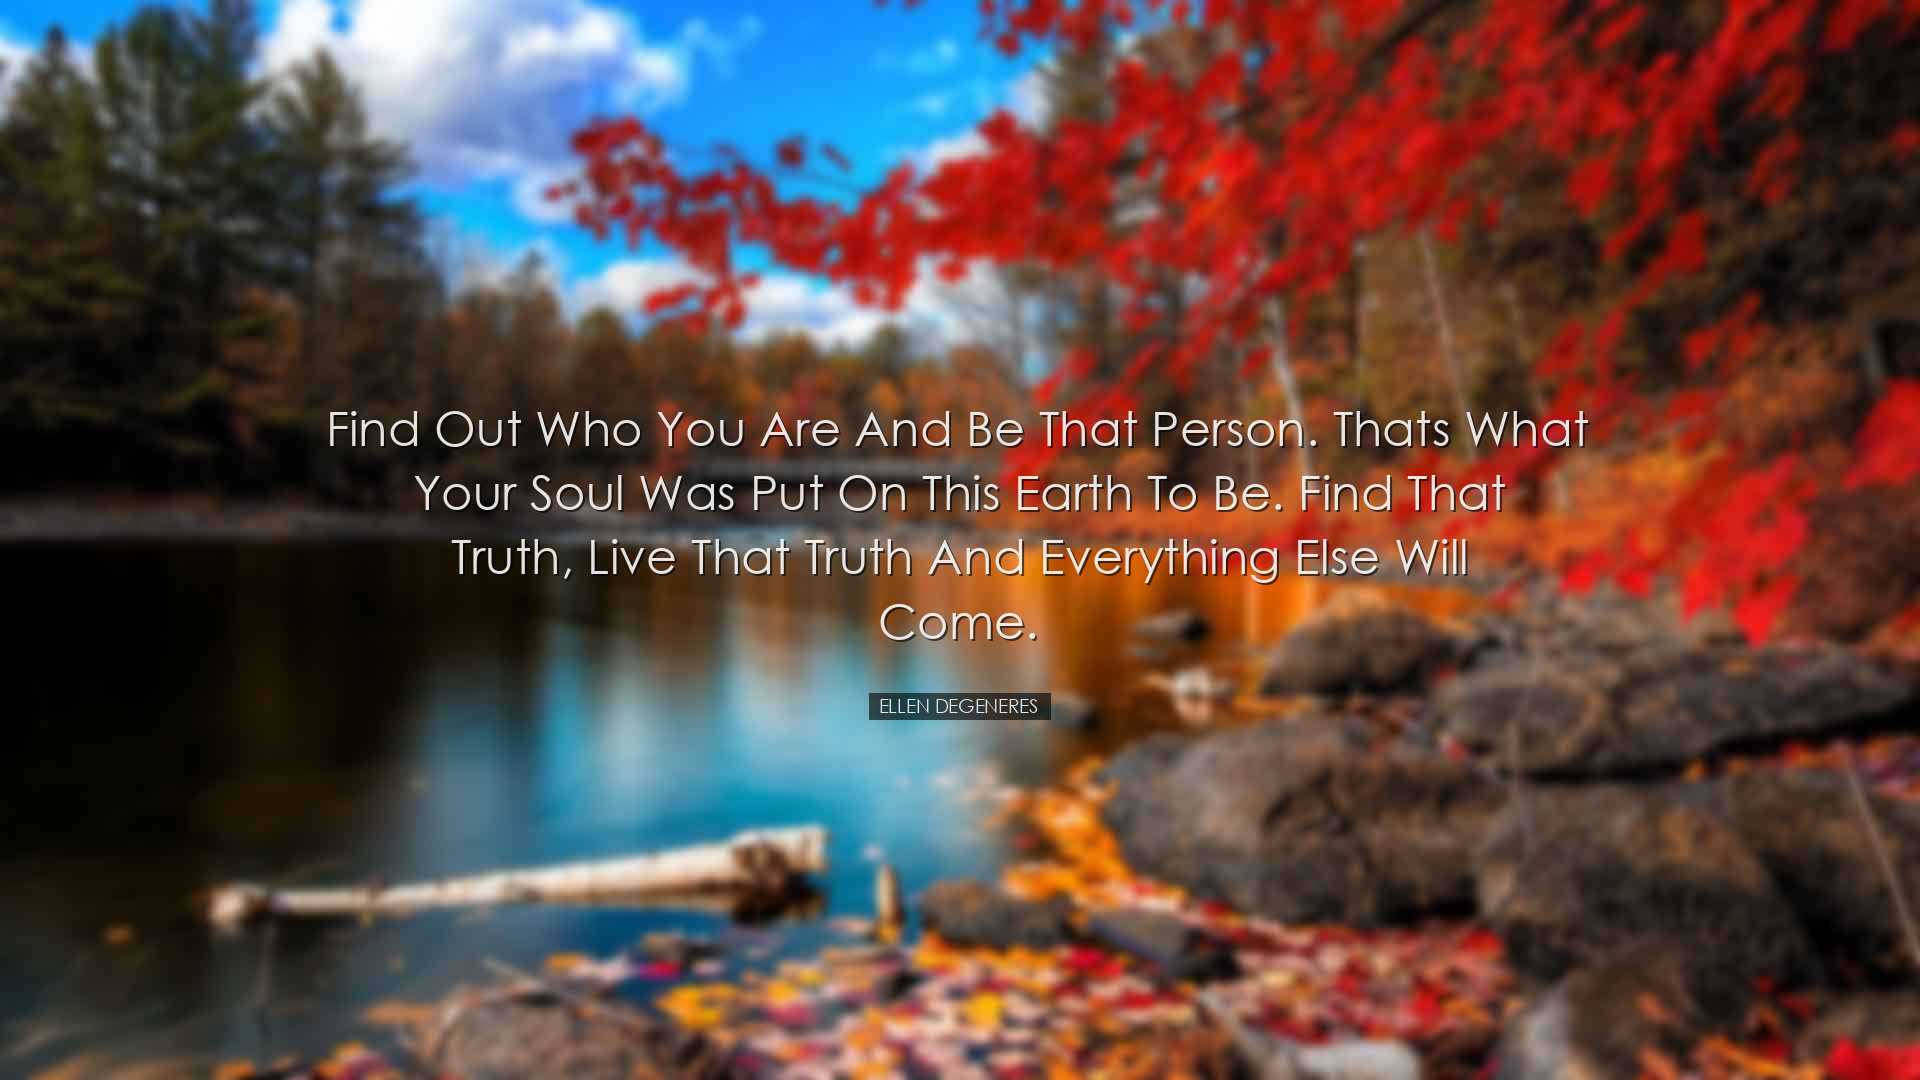 Find out who you are and be that person. Thats what your soul was